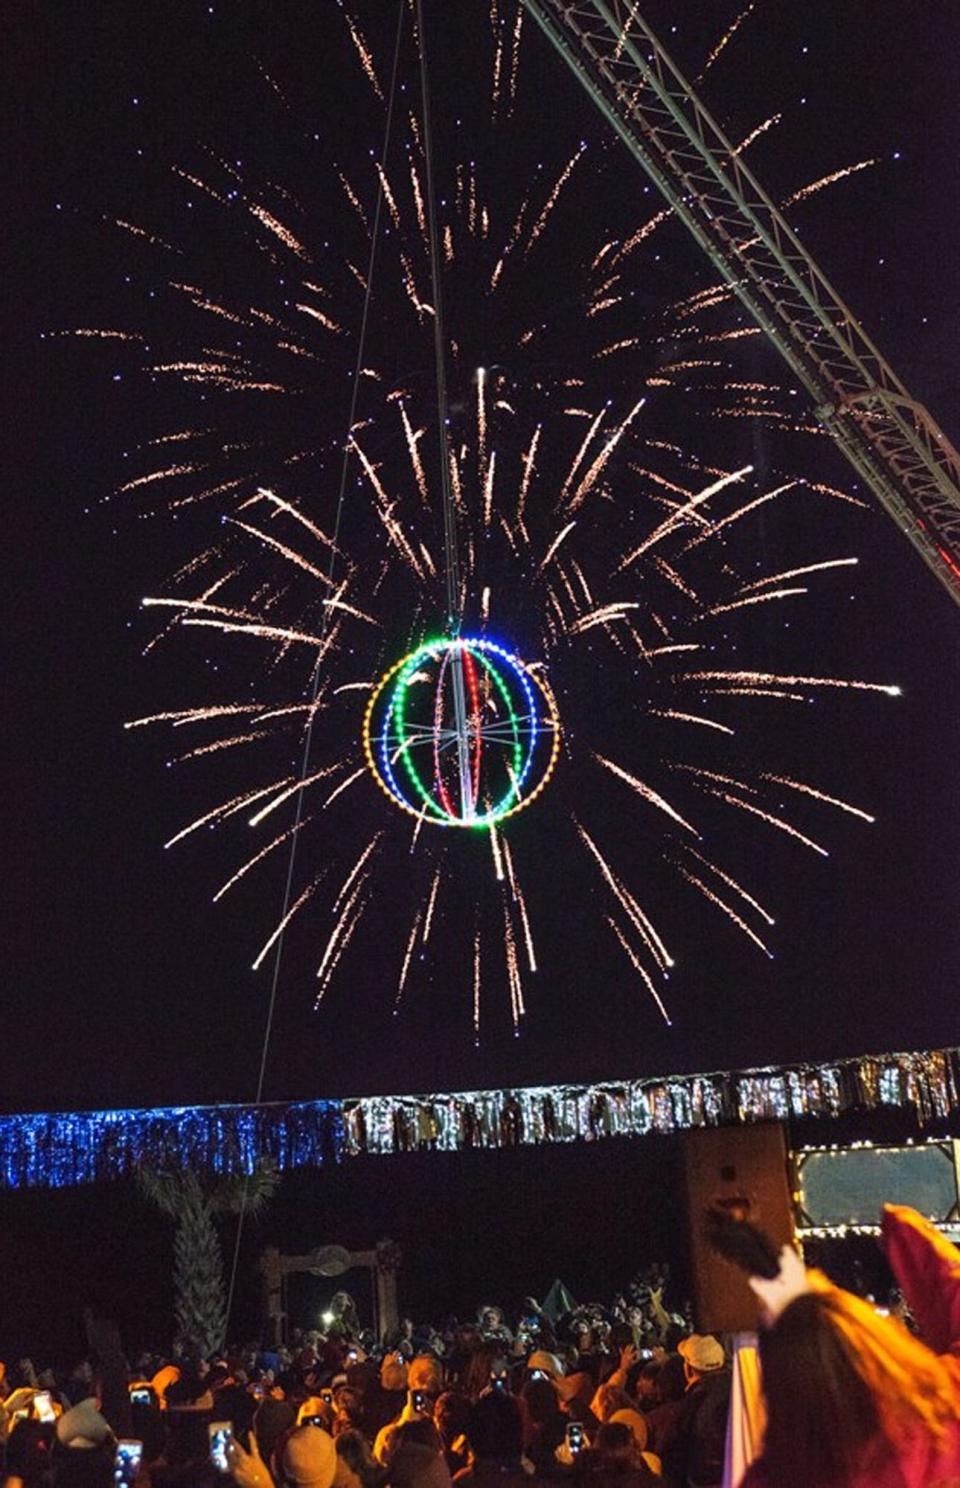 The Island of Lights New Year's Eve Celebration will be held Dec. 31 at Ocean Front Park, Kure Beach.